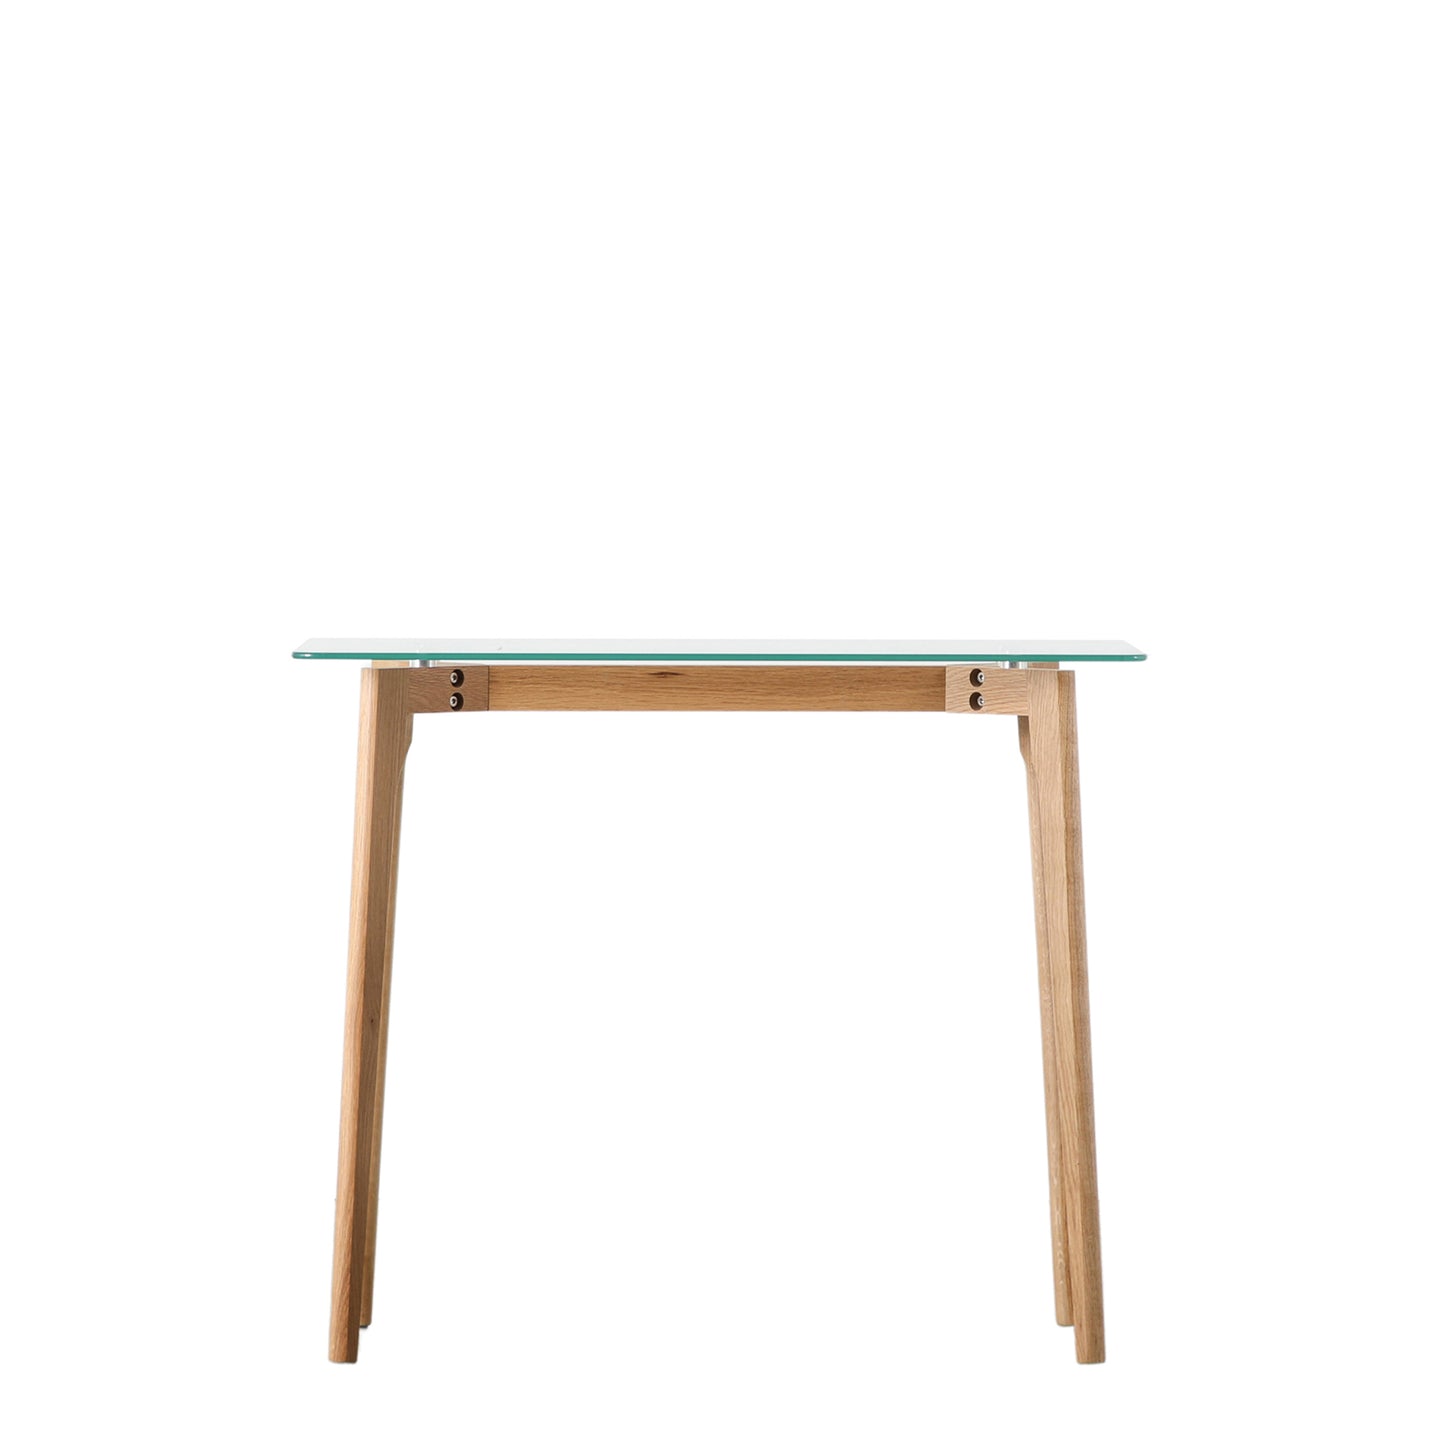 Ashprington Console Table Oak with glass top and wooden legs, perfect for interior decor and home furniture.